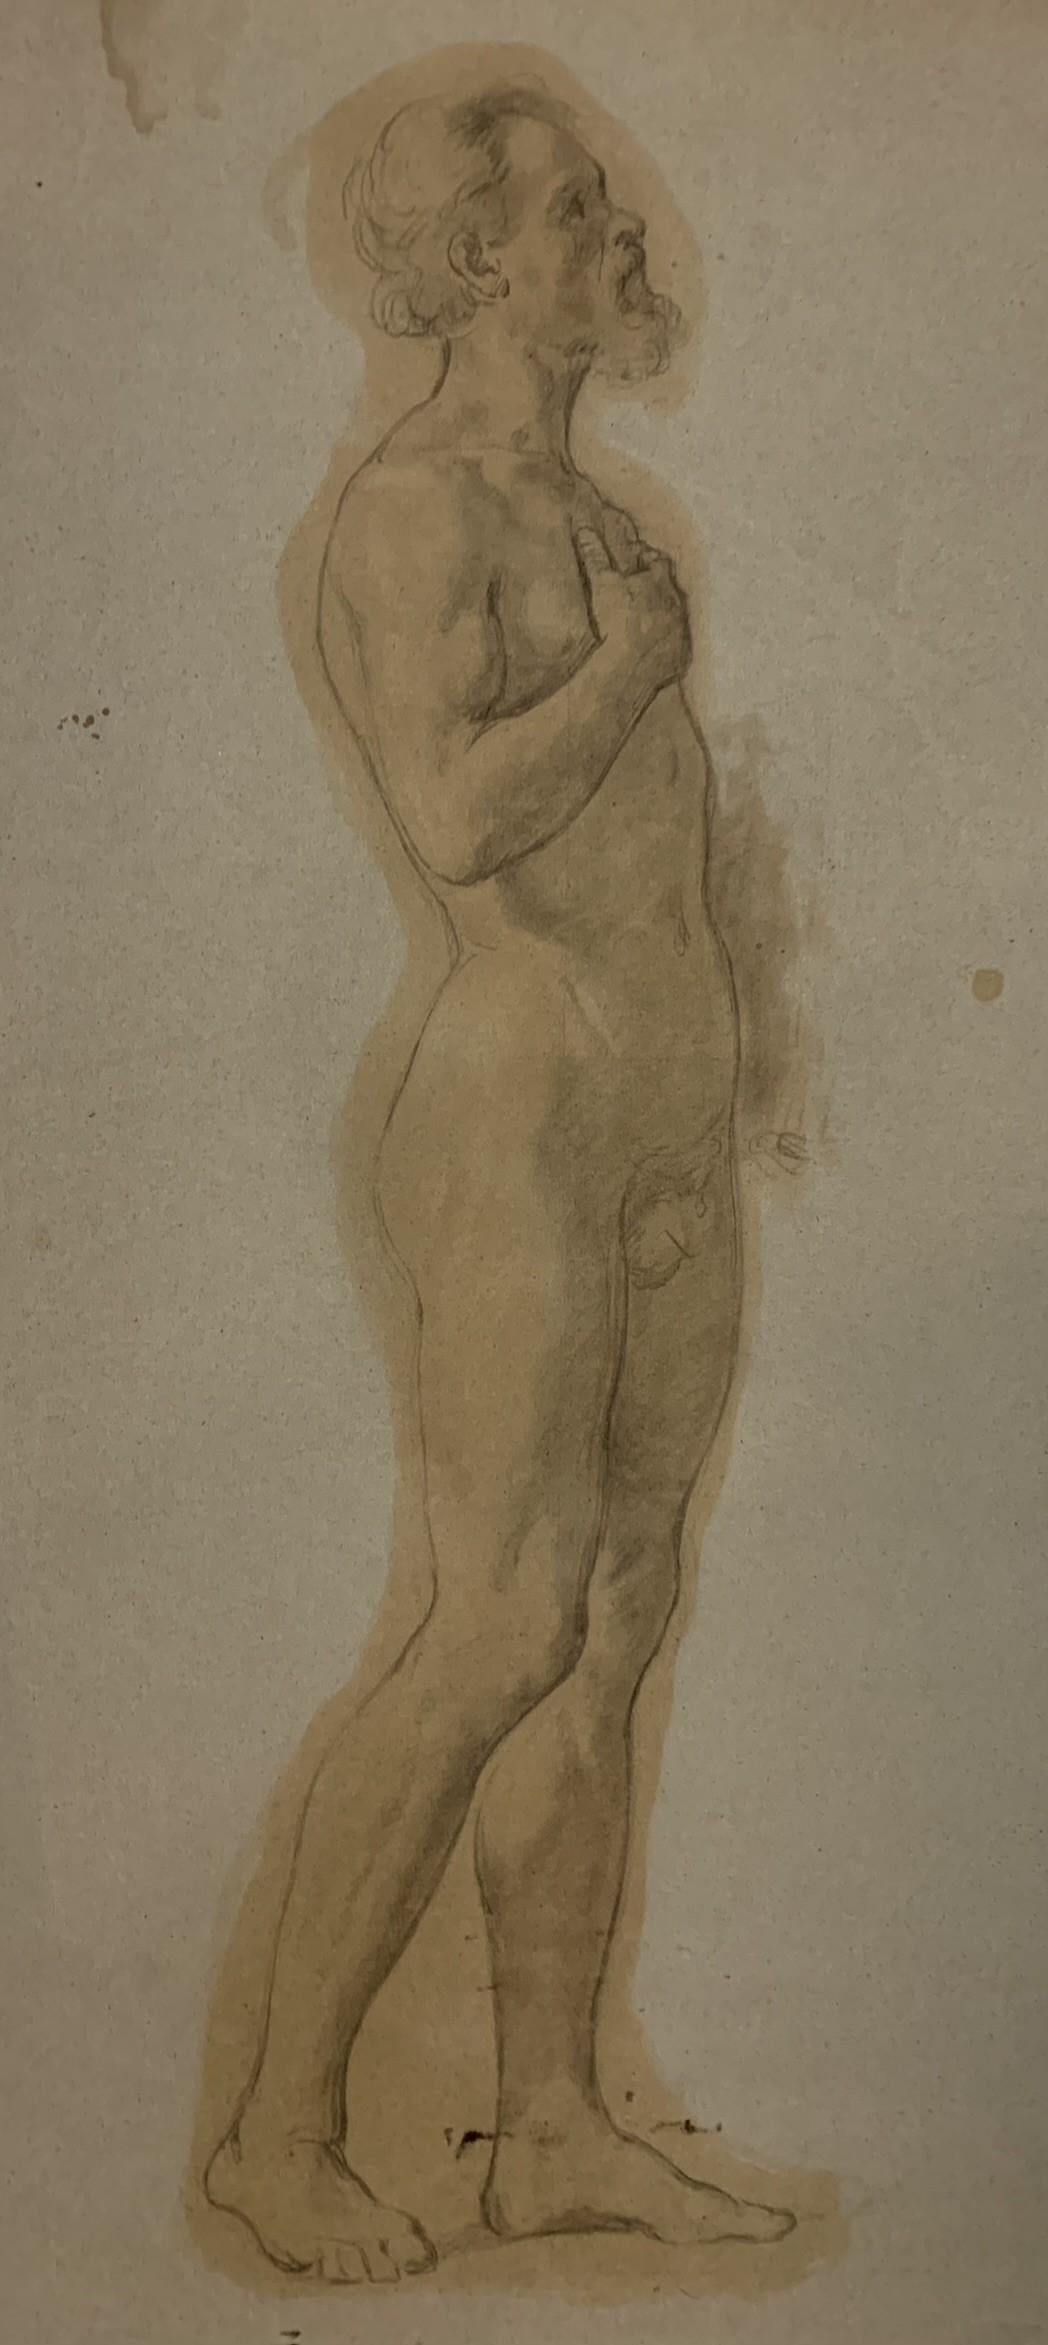 Unknown Nude Painting - Large Academic Study Of The Nude: Handsome Man With A Beard. XIXcentury.